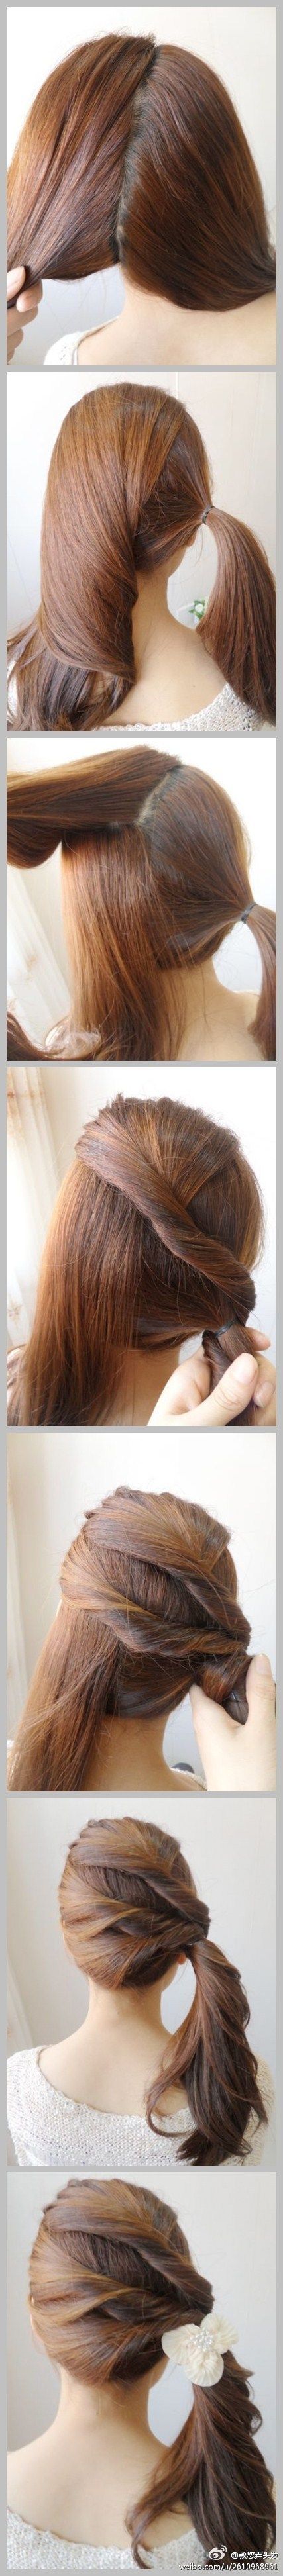 Latest Party Hairstyles Tutorial Step by Step with Pictures2015-2016 (28)